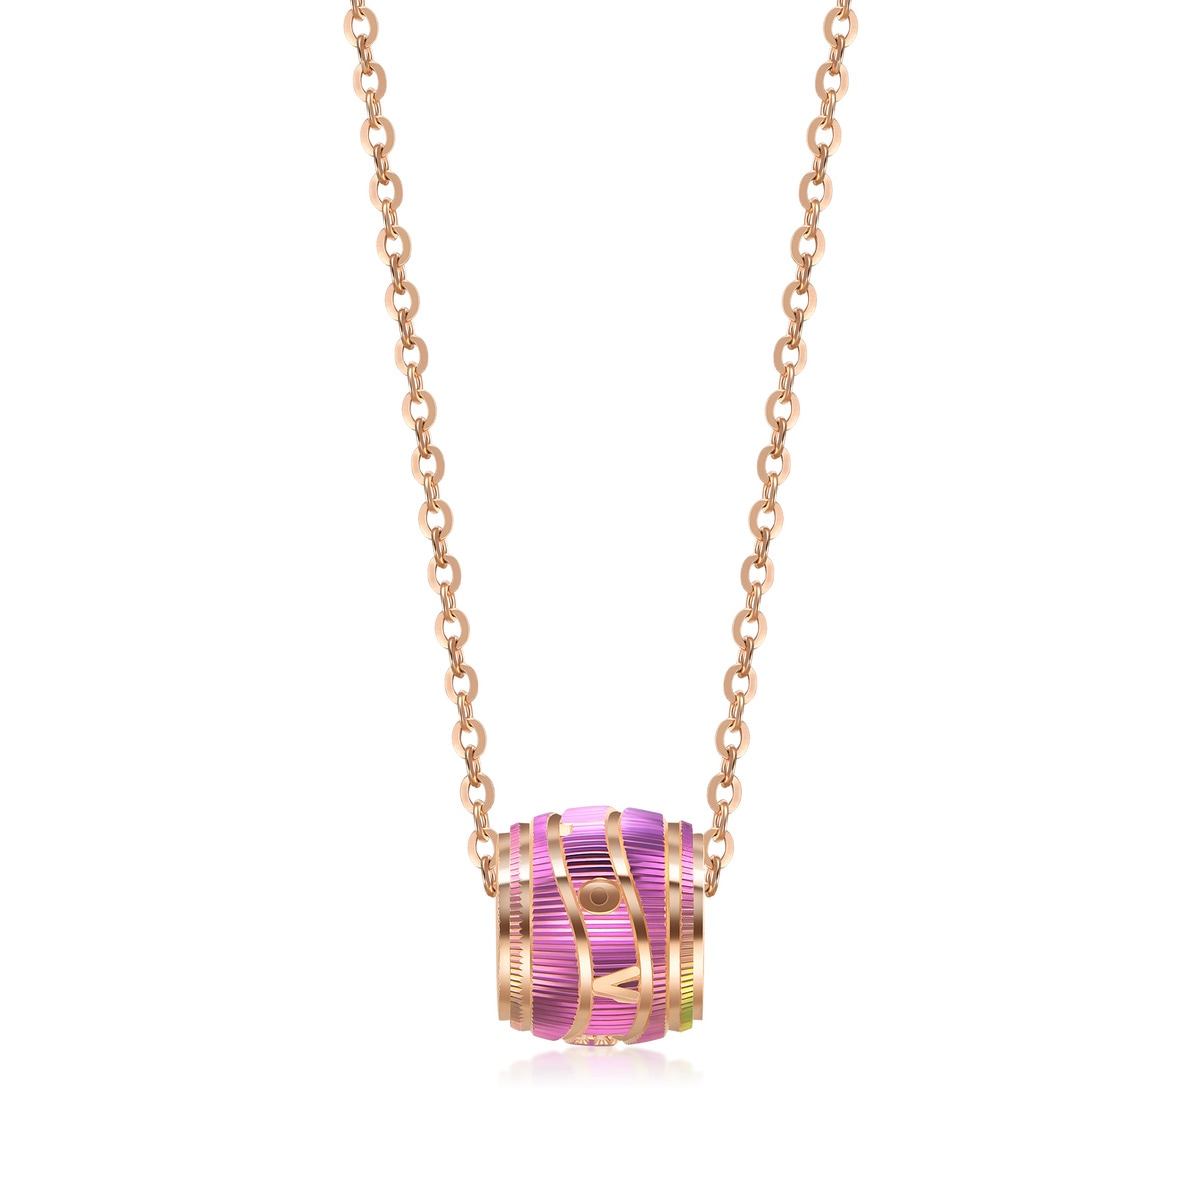 Minty Collection 18K Gold Necklace - 91697N | Chow Sang Sang Jewellery